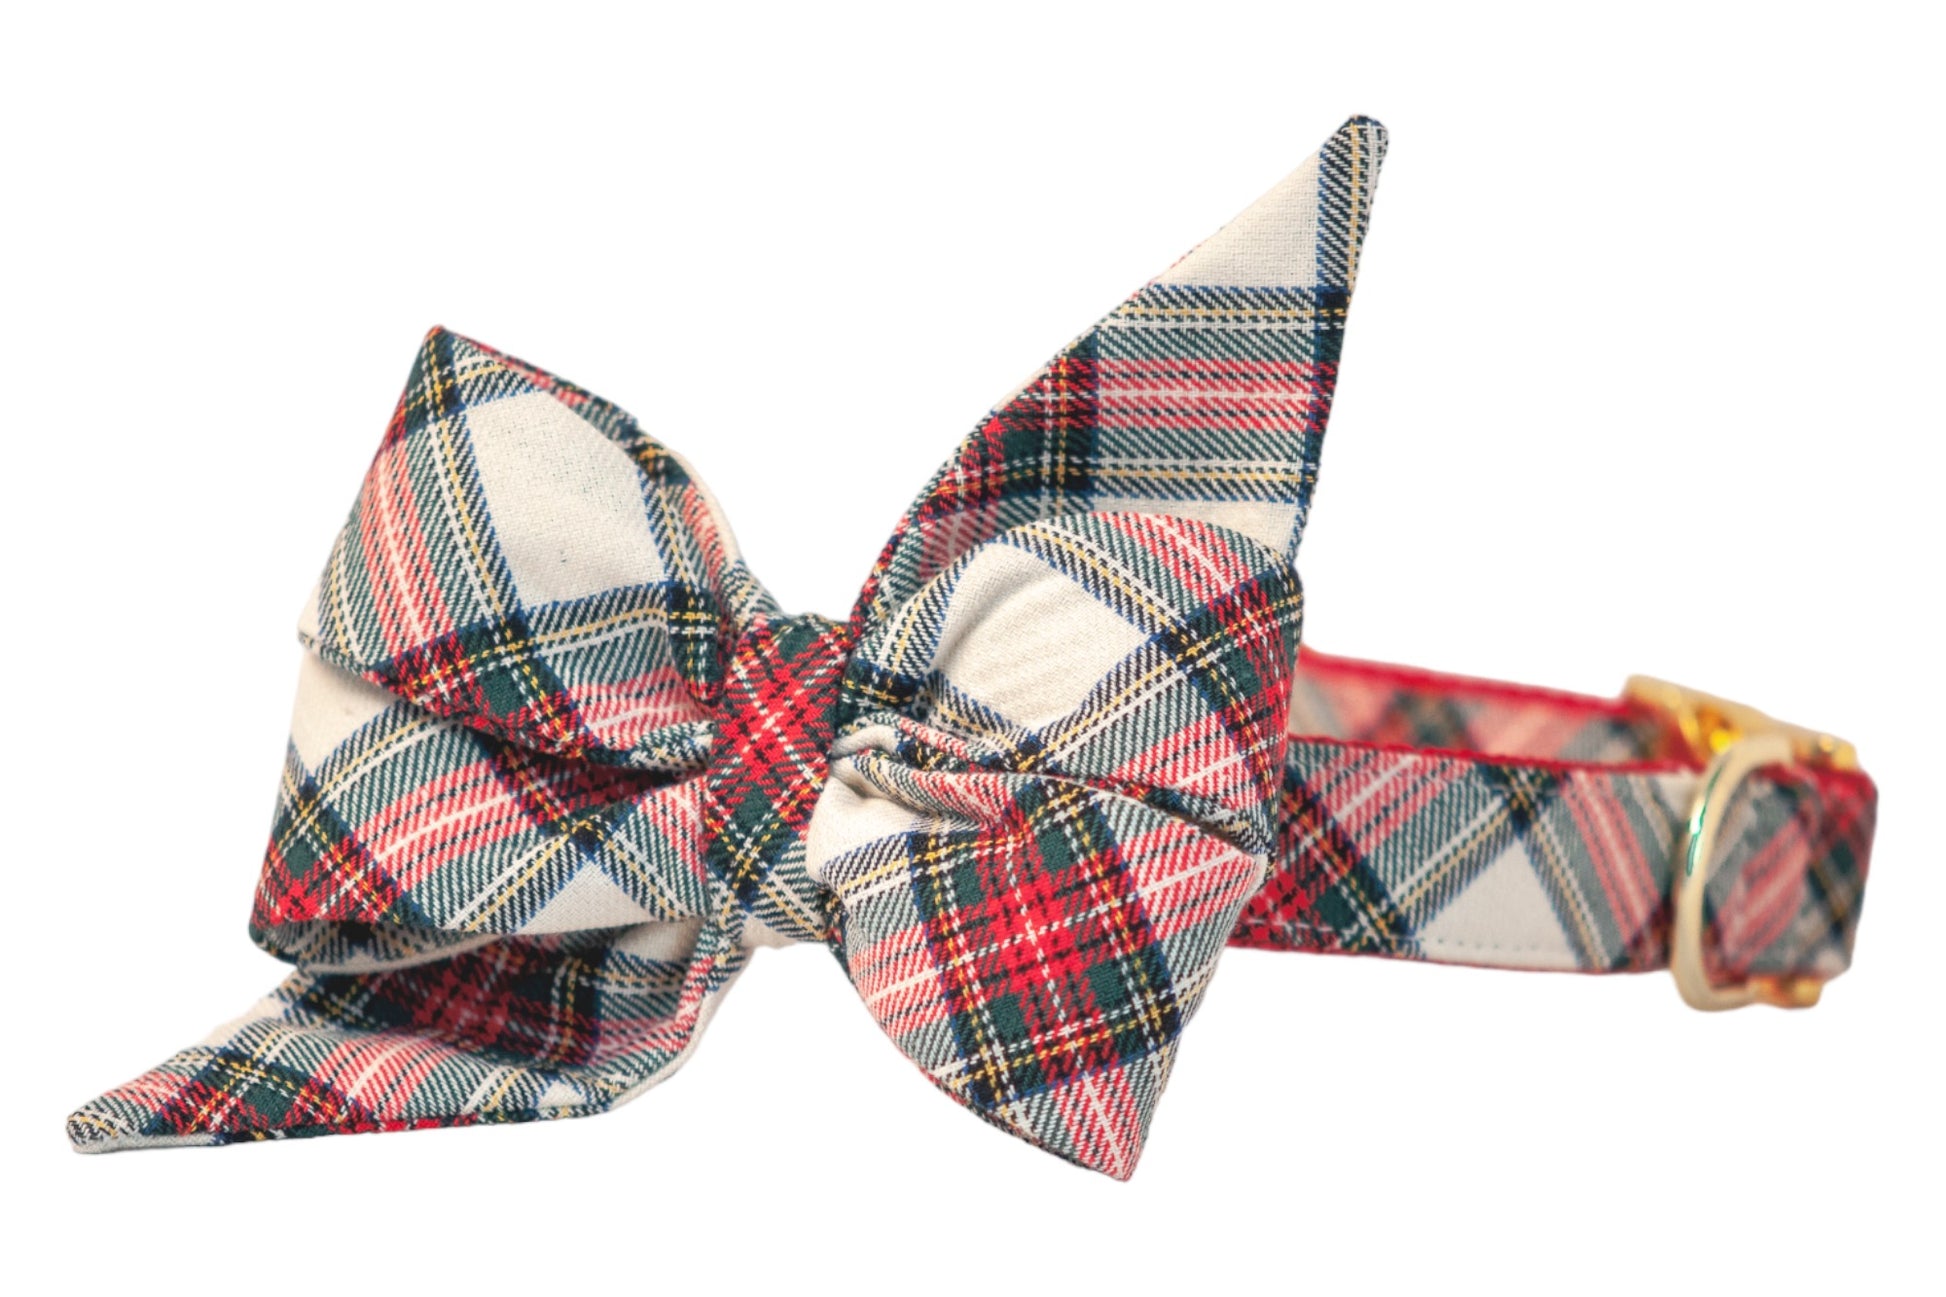 Ellie's Plaid Belle Bow Dog Collar- Two Styles! - Crew LaLa